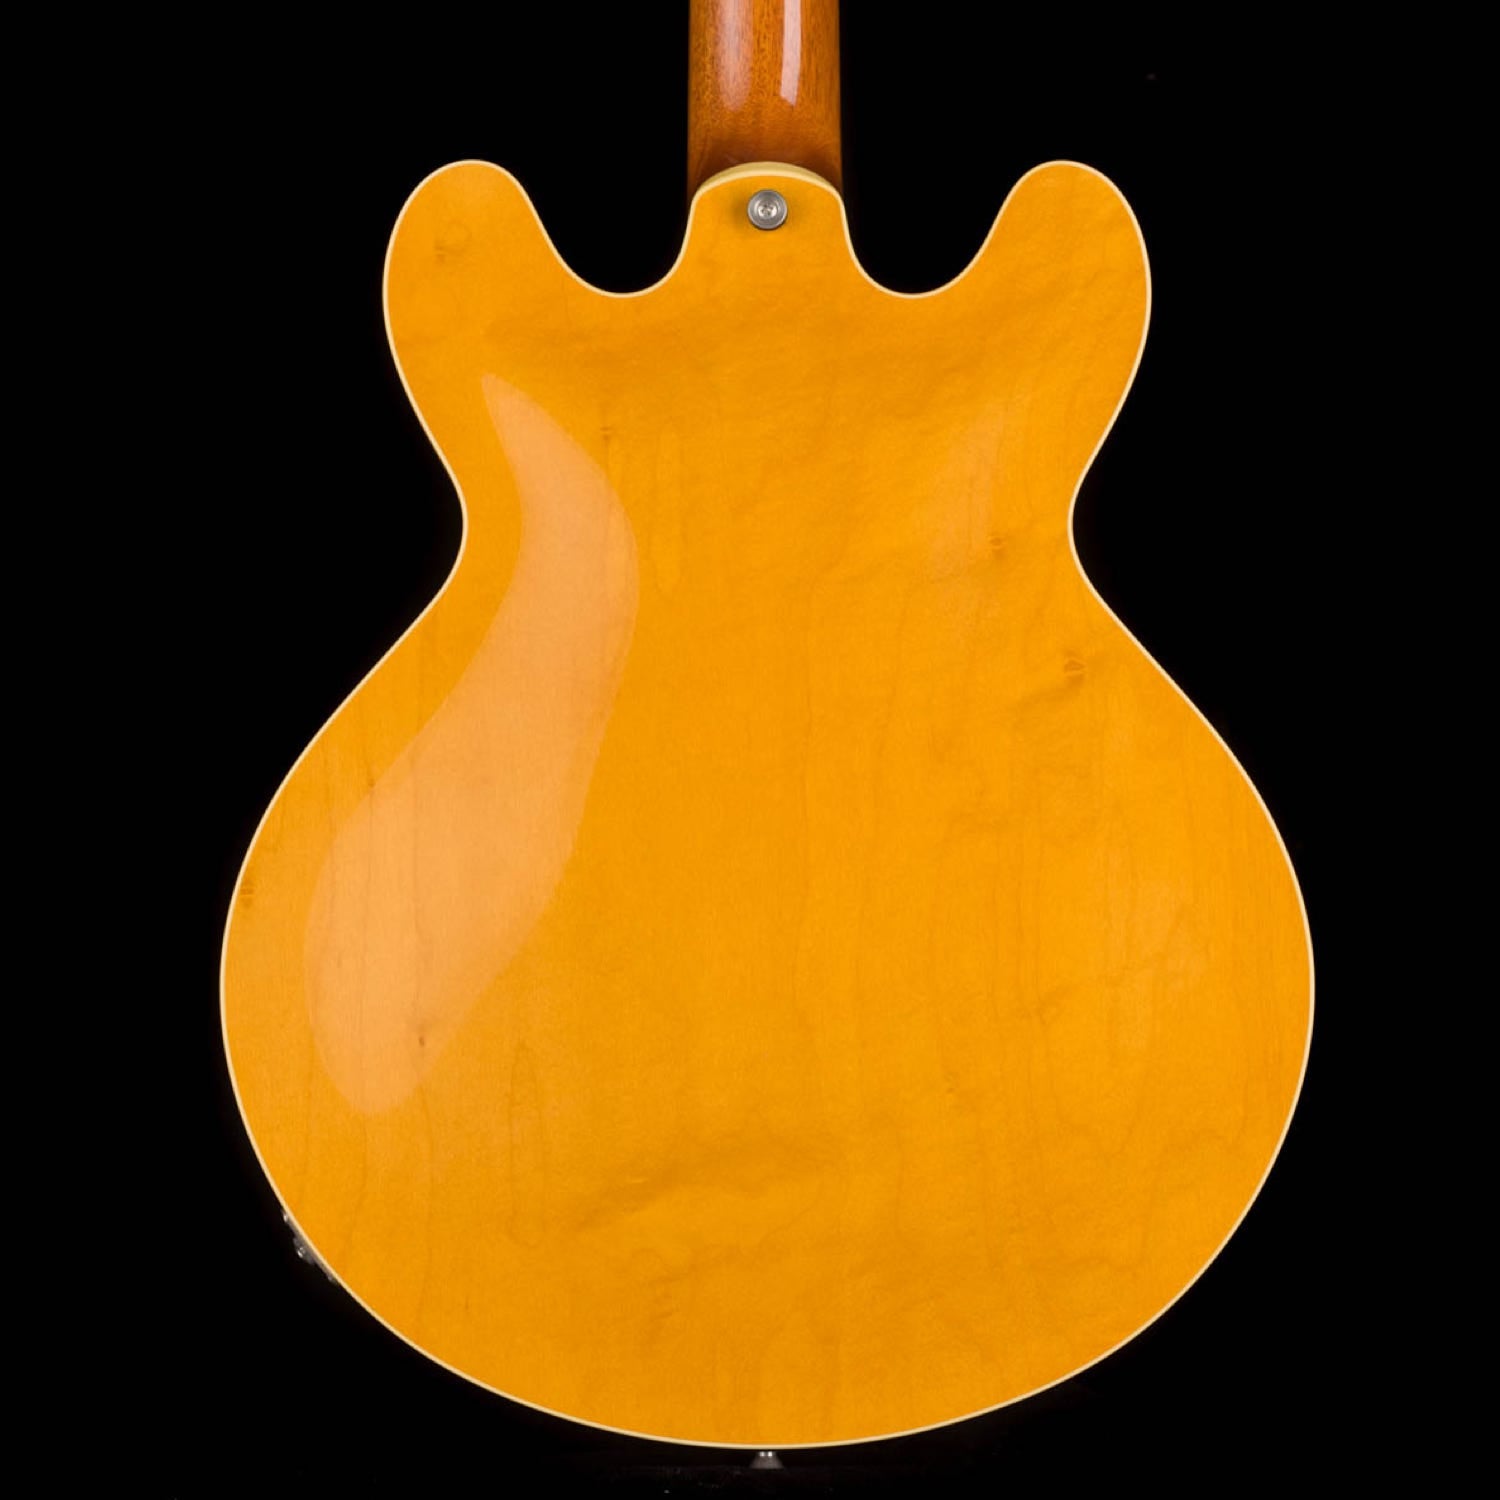 Collings I35 LC Vintage Aged Blonde